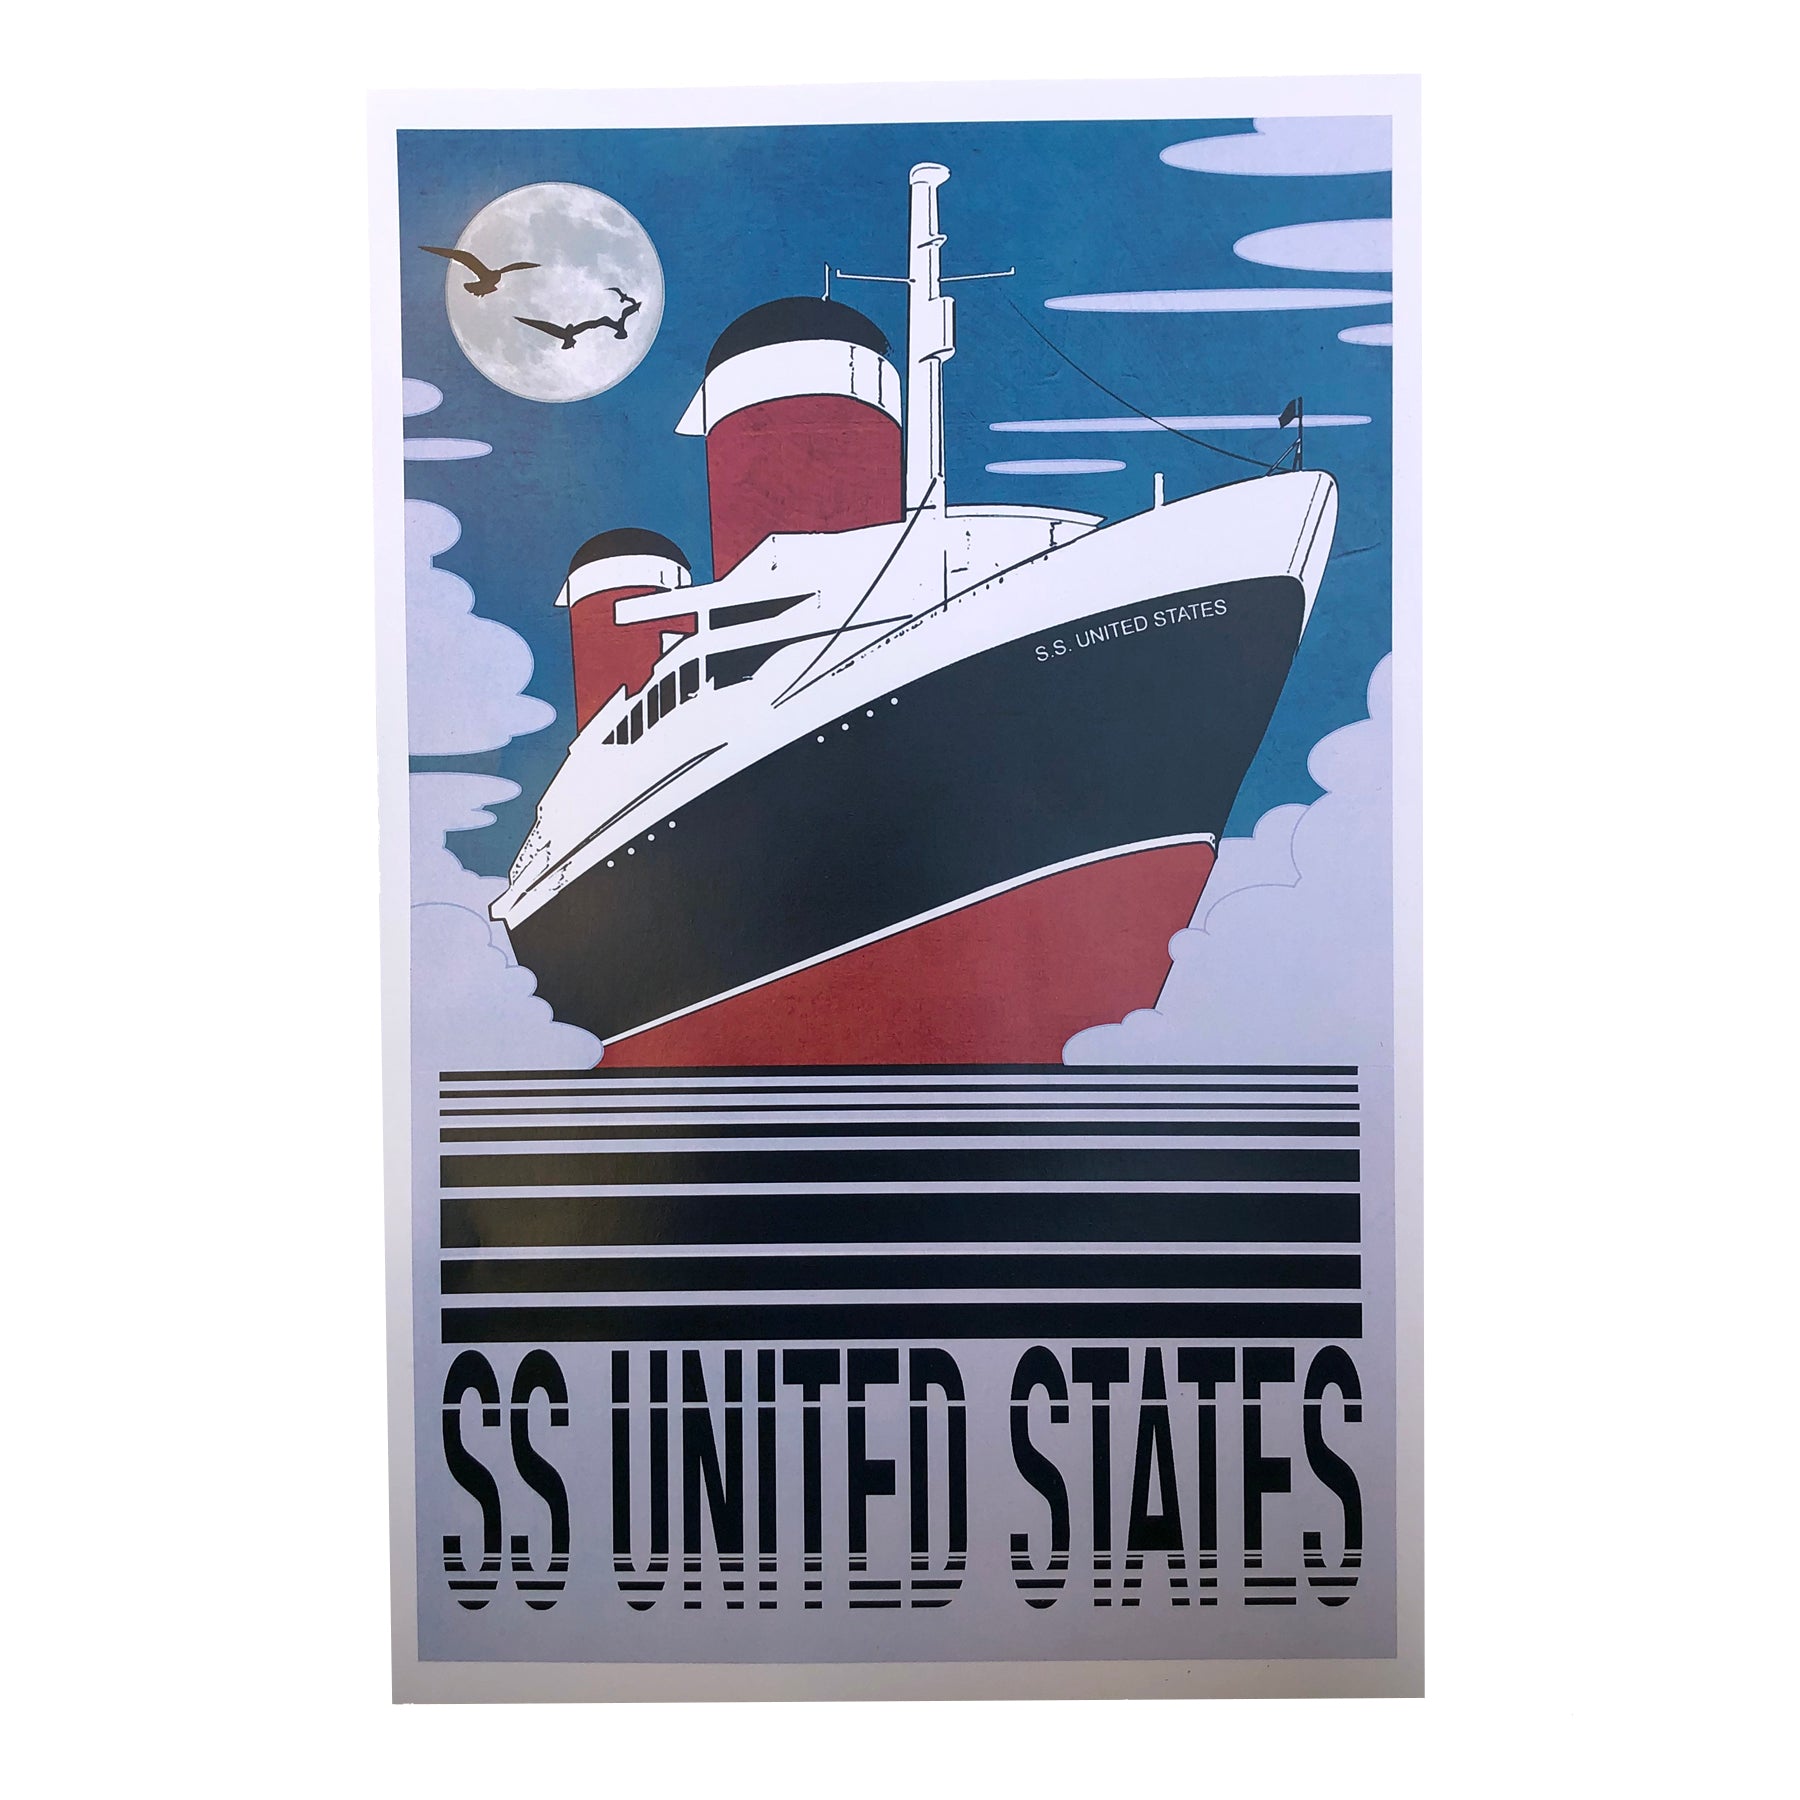 SS United States Poster 11x17